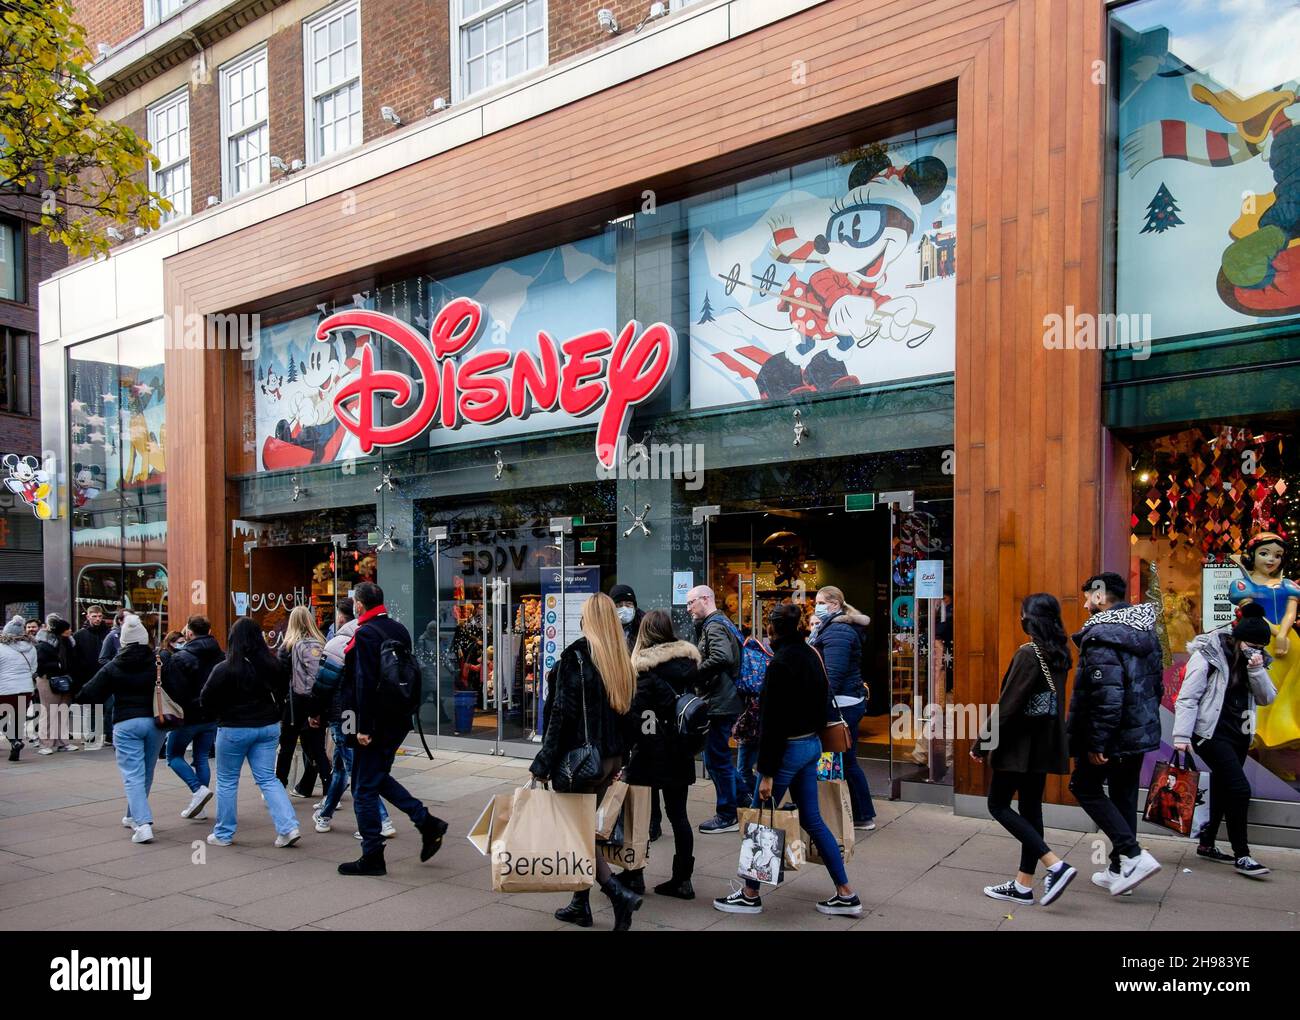 Christmas shoppers at the Disney store on London's Oxford street. The UK government reimposed measures making it a legal requirement to wear face coverings in shops and on public transport unless exempt from 30th November amidst concerns over the Omicron variant of covid-19. Stock Photo